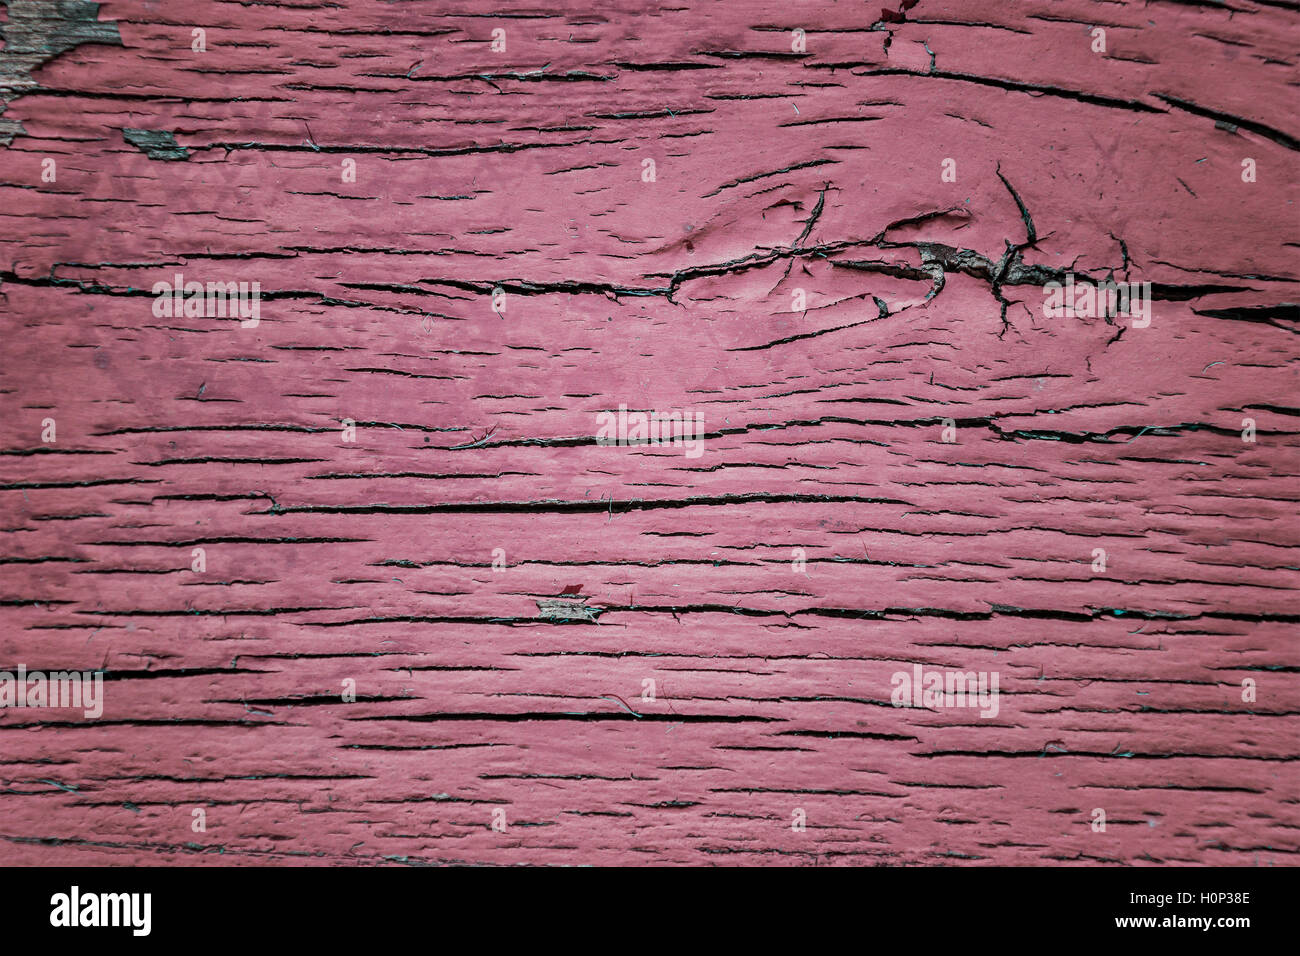 Image of pink painted wood background. Stock Photo